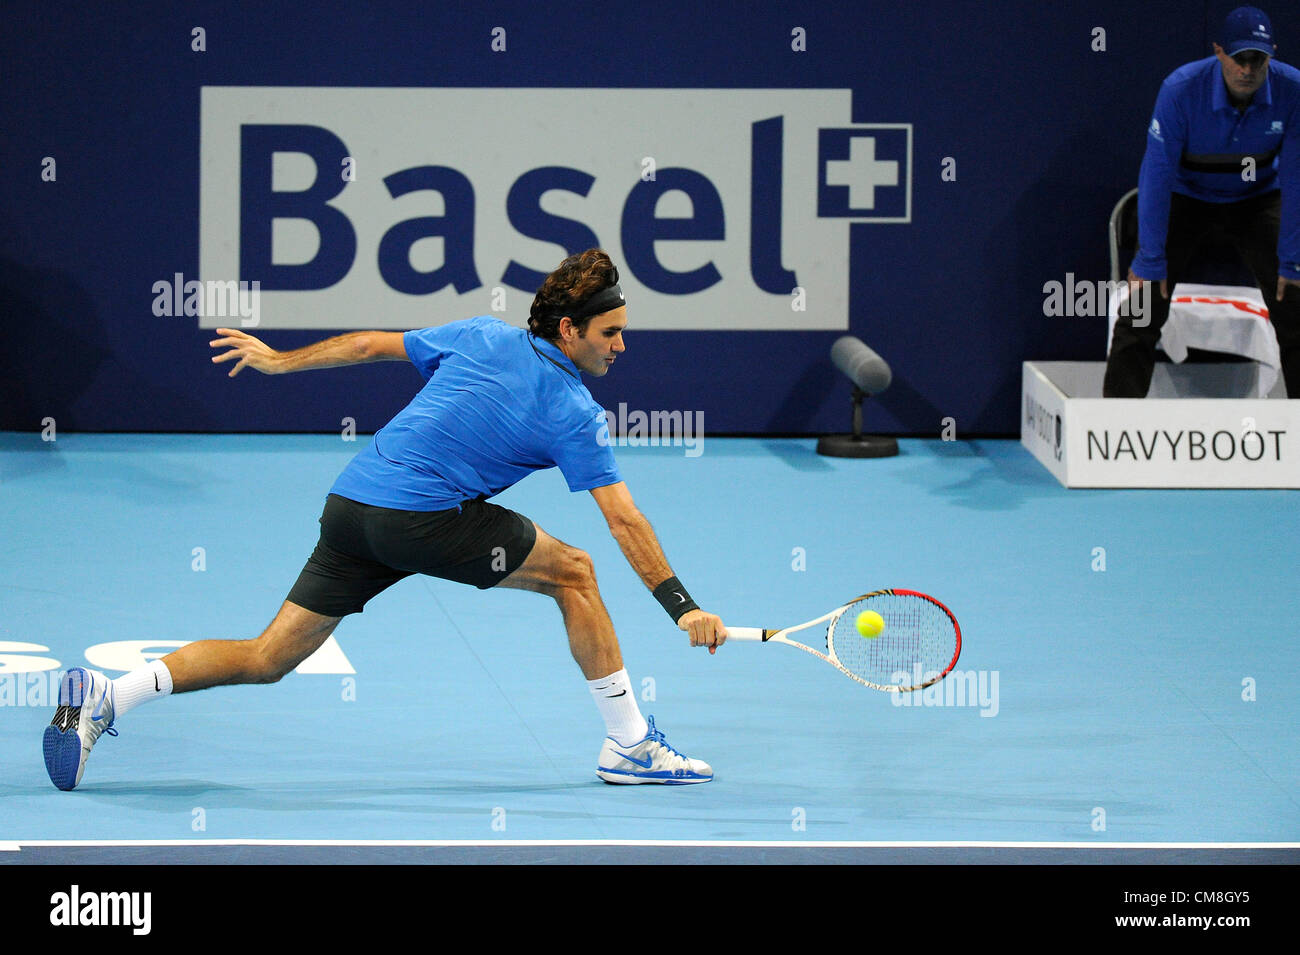 28.10.2012 Basel, Switzerland. Roger Federer of Switzerland in action  during the Swiss Indoors ATP World